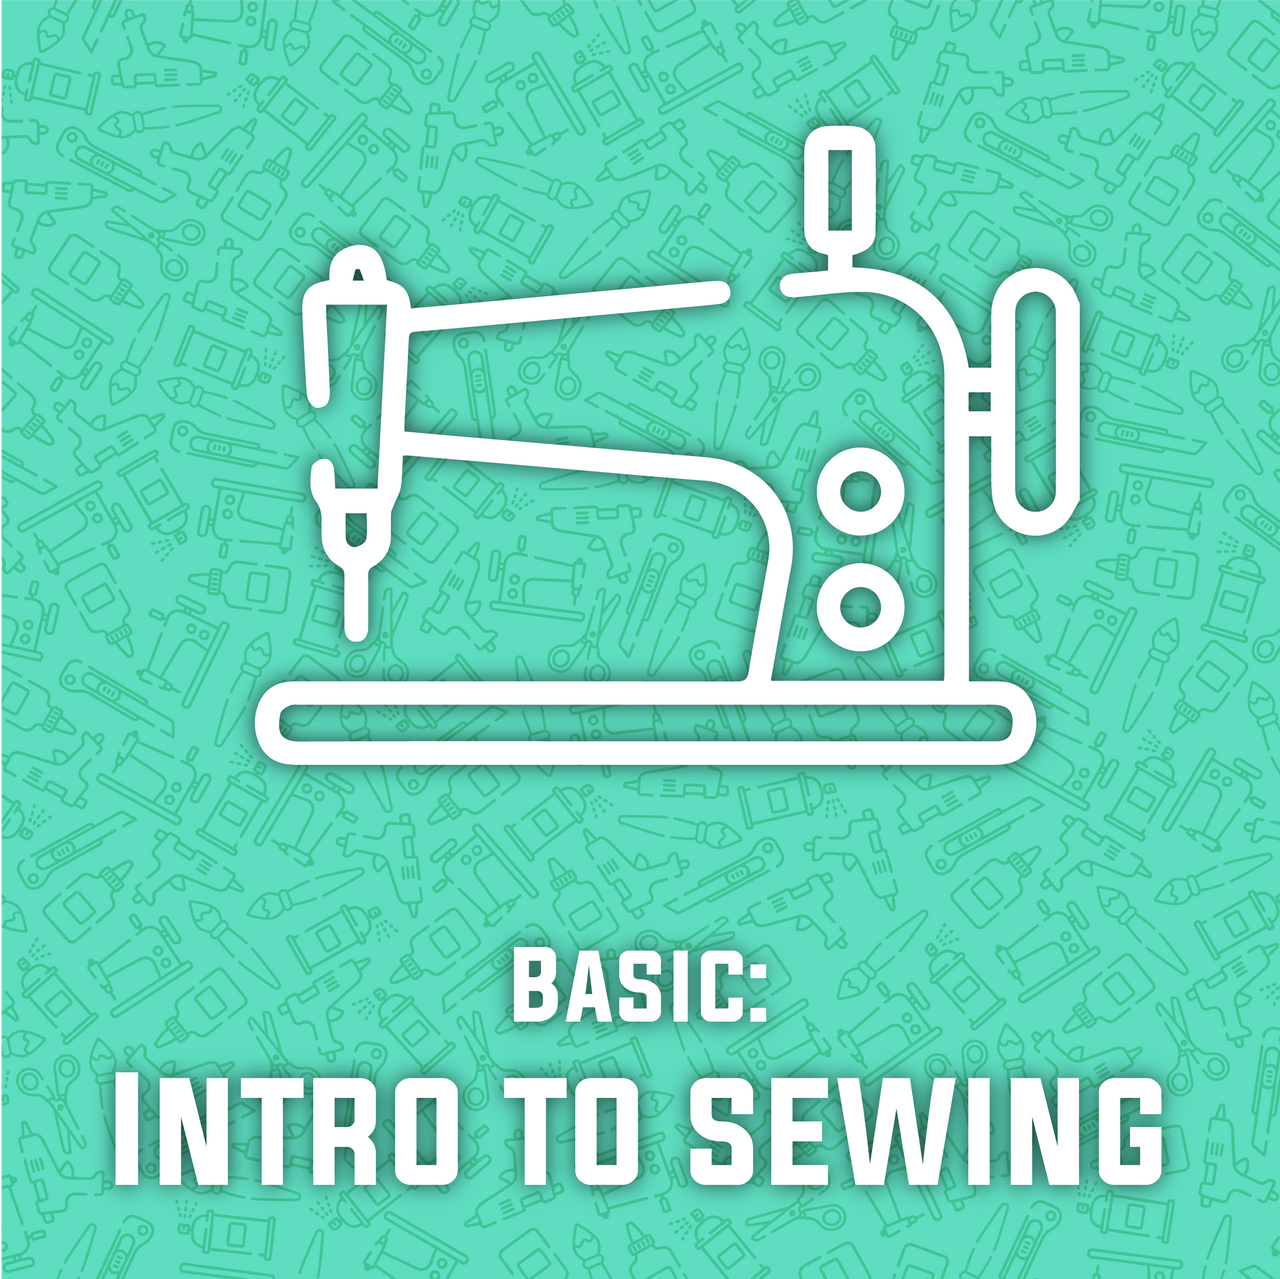 Intro to Sewing Workshop - With Artemis Costuming (includes $20 of materials), workshop/class- Lumin's Workshop